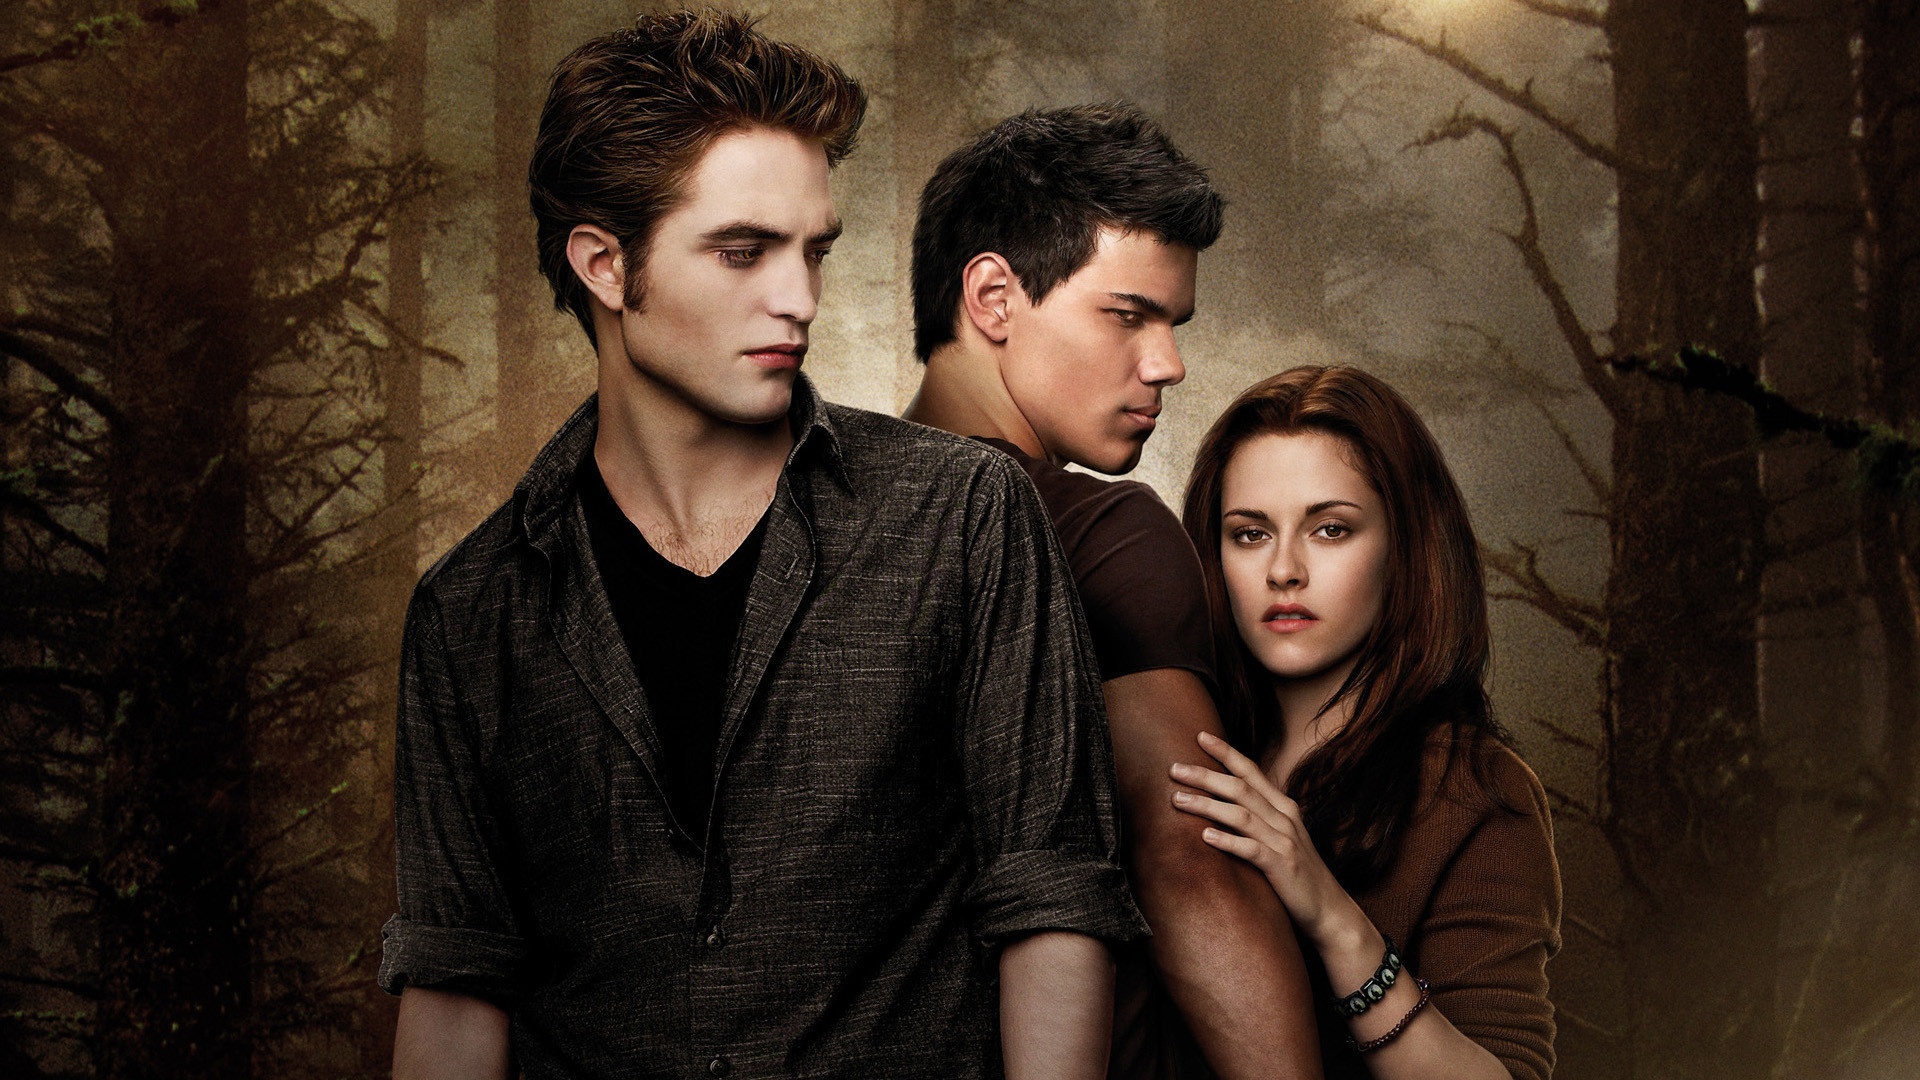 The Twilight New Moon Movie Wallpapers | HD Wallpapers